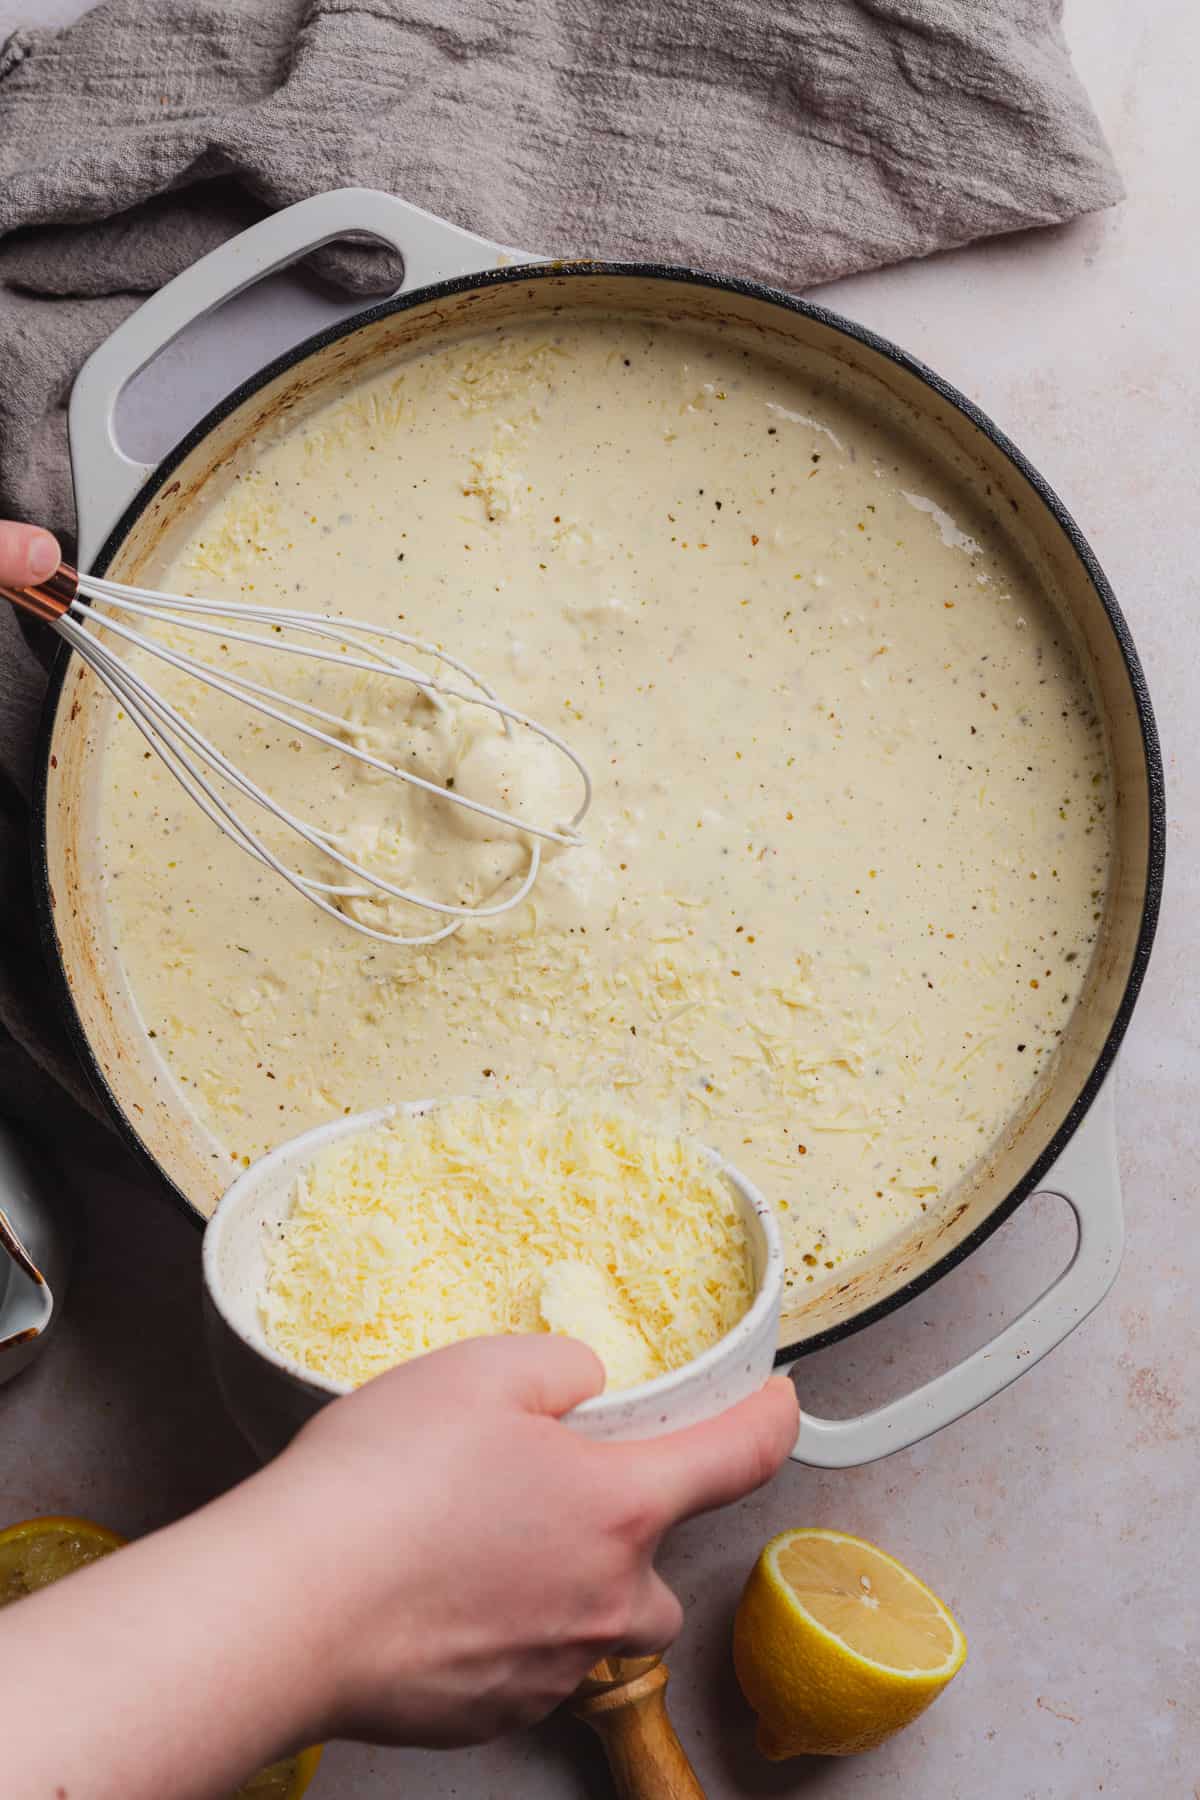 pouring freshly shredded parmesan cheese into a creamy sauce with a whisk mixing everything together